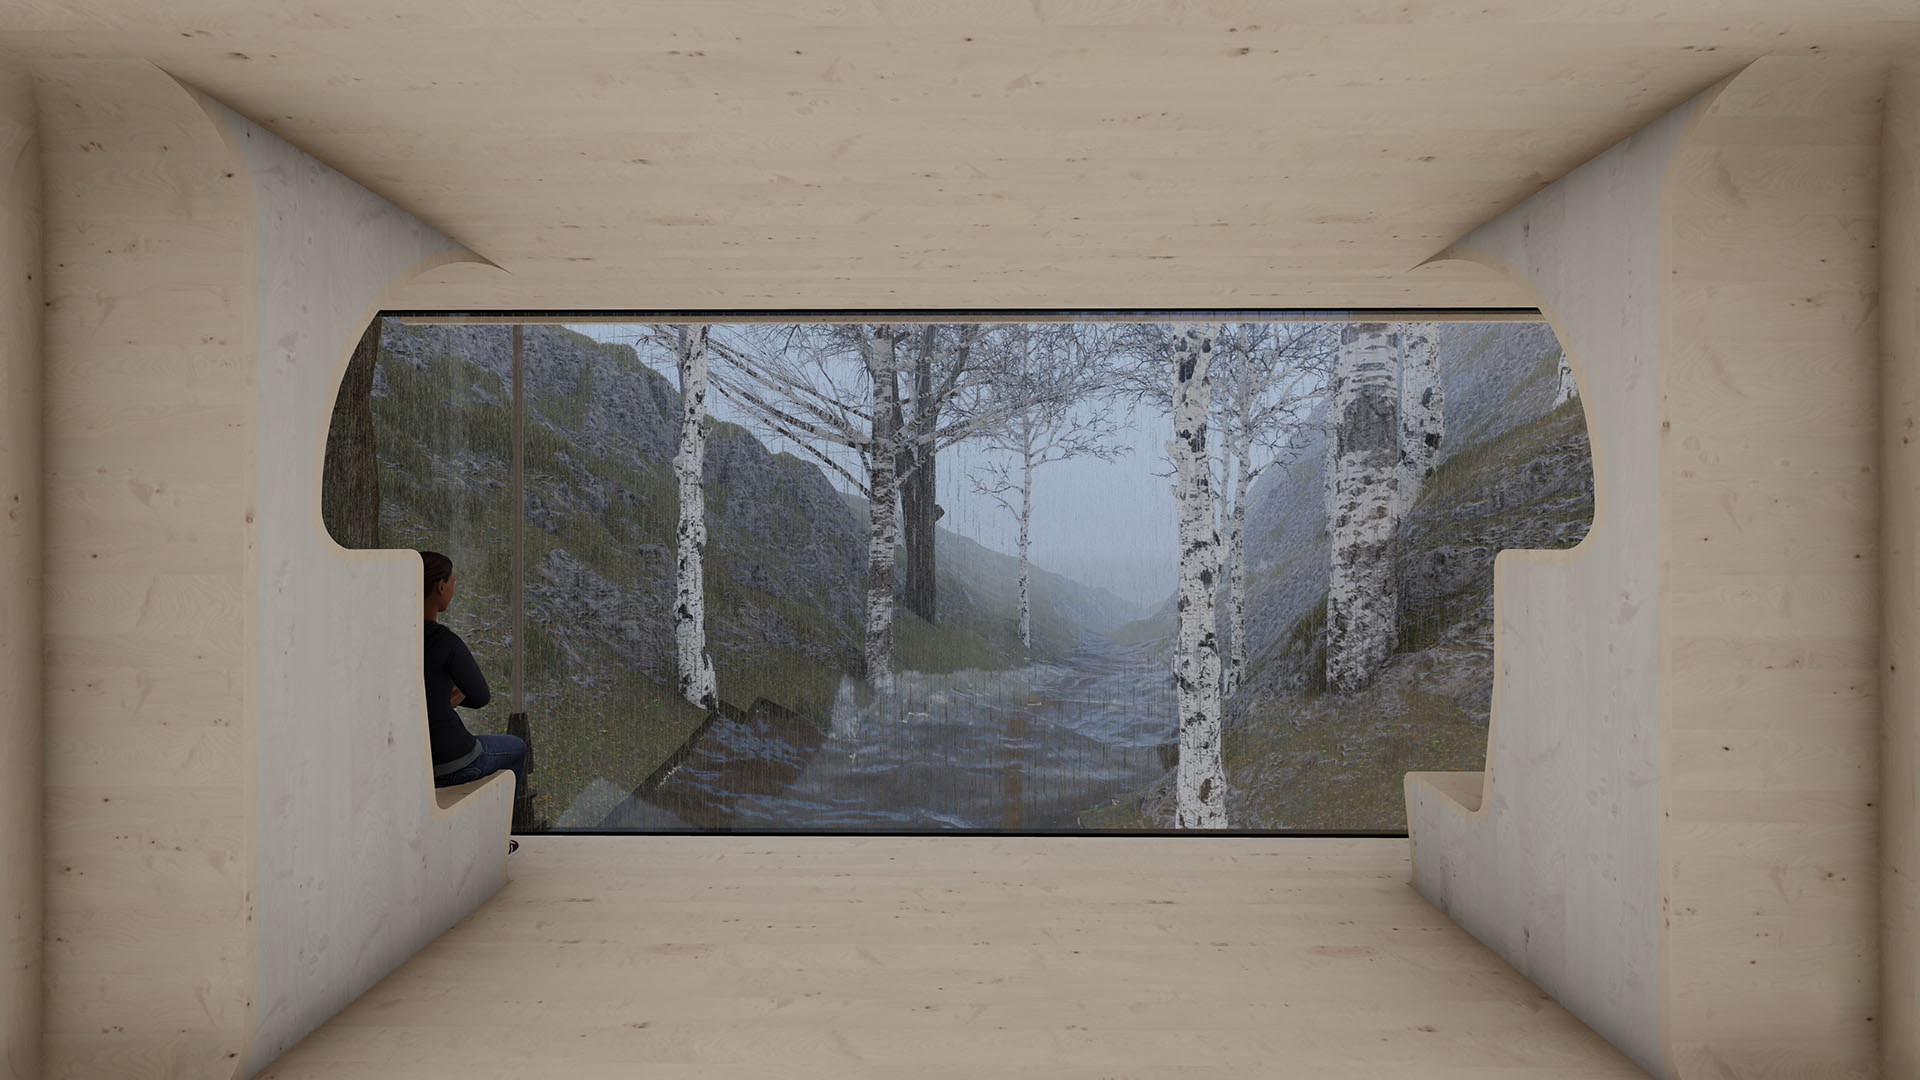 Interior Visualisation of the Sanctuary's view of the River